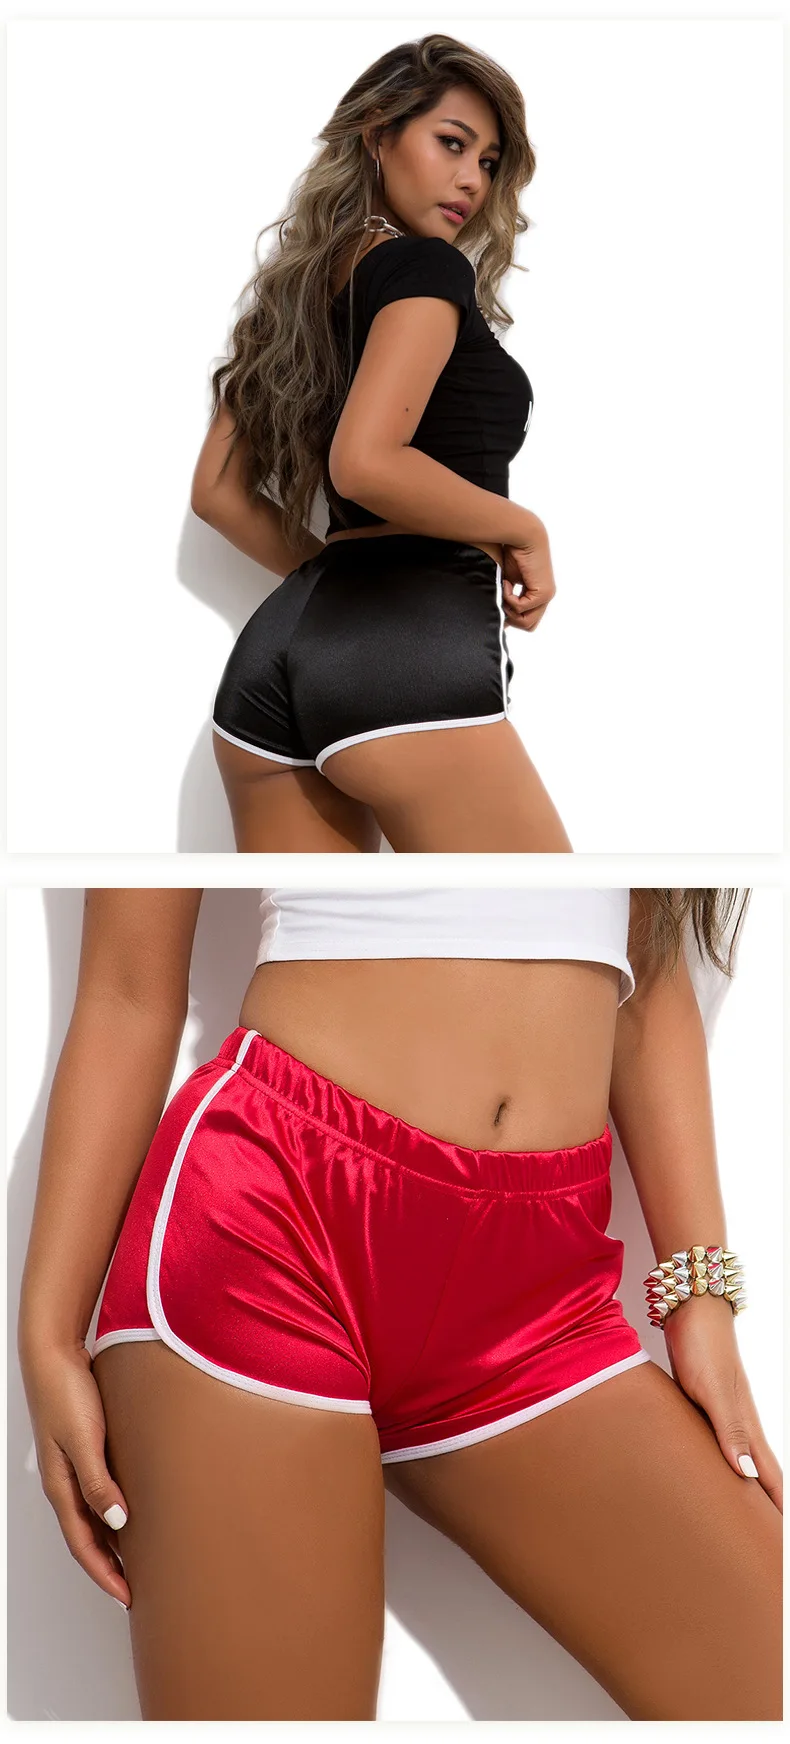 Echoine 2021 Summer Women Sexy Mini Casual Home Shorts Lady Fashion Workout fitness Sport Beach Hot Solid Soft Shorts hotpants